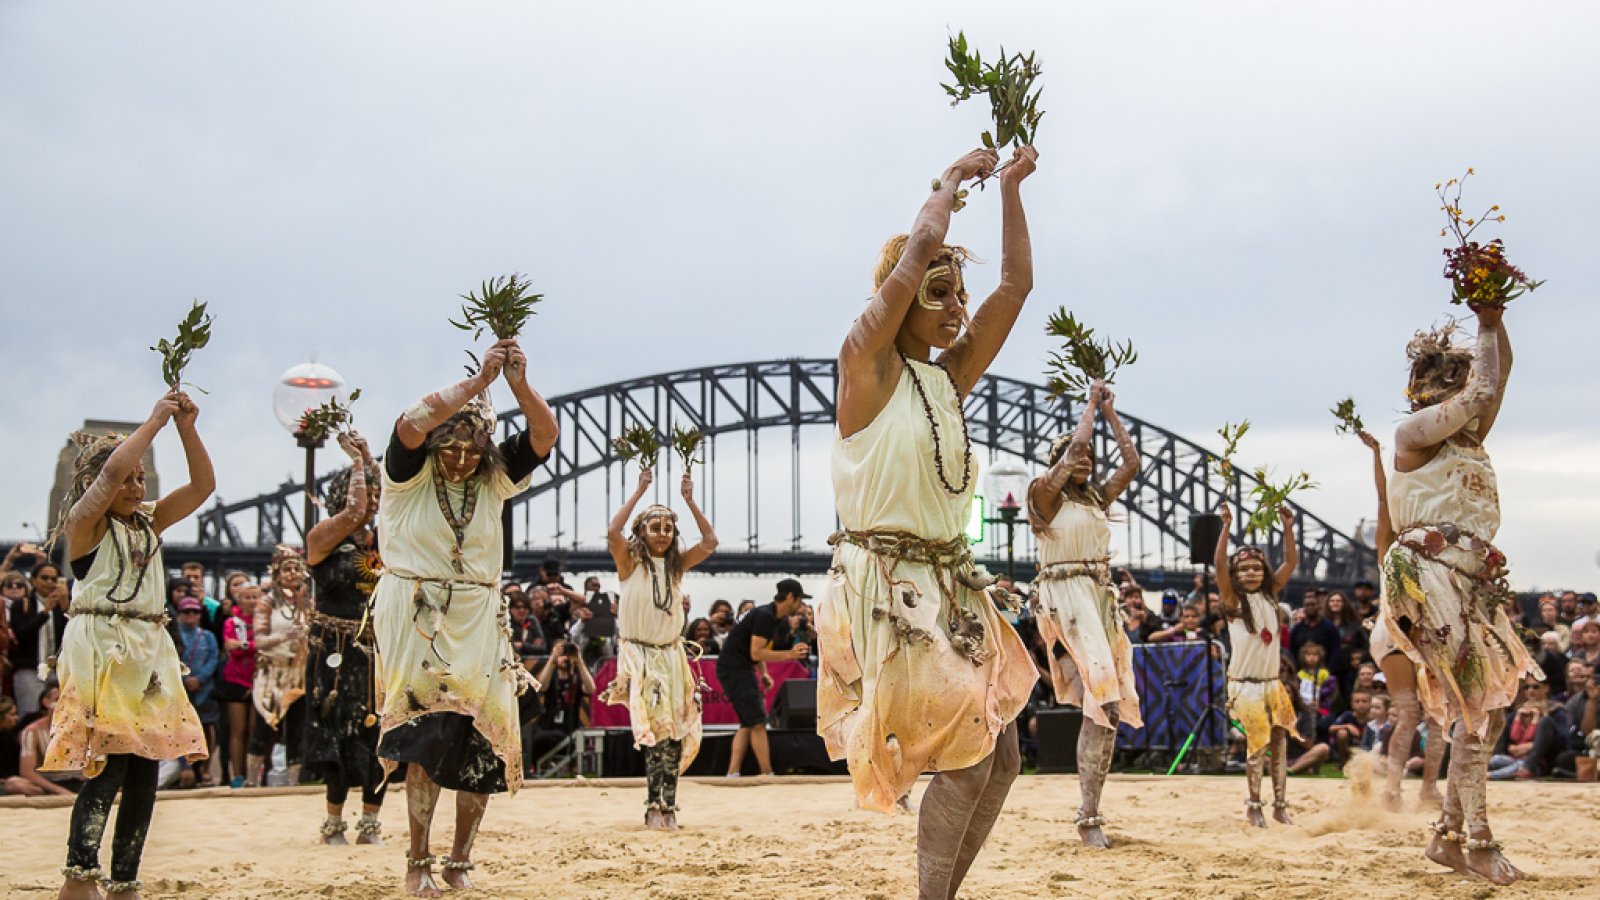 Women in sand pit performing indigenous dance in the Homeground of Sydney opera house.